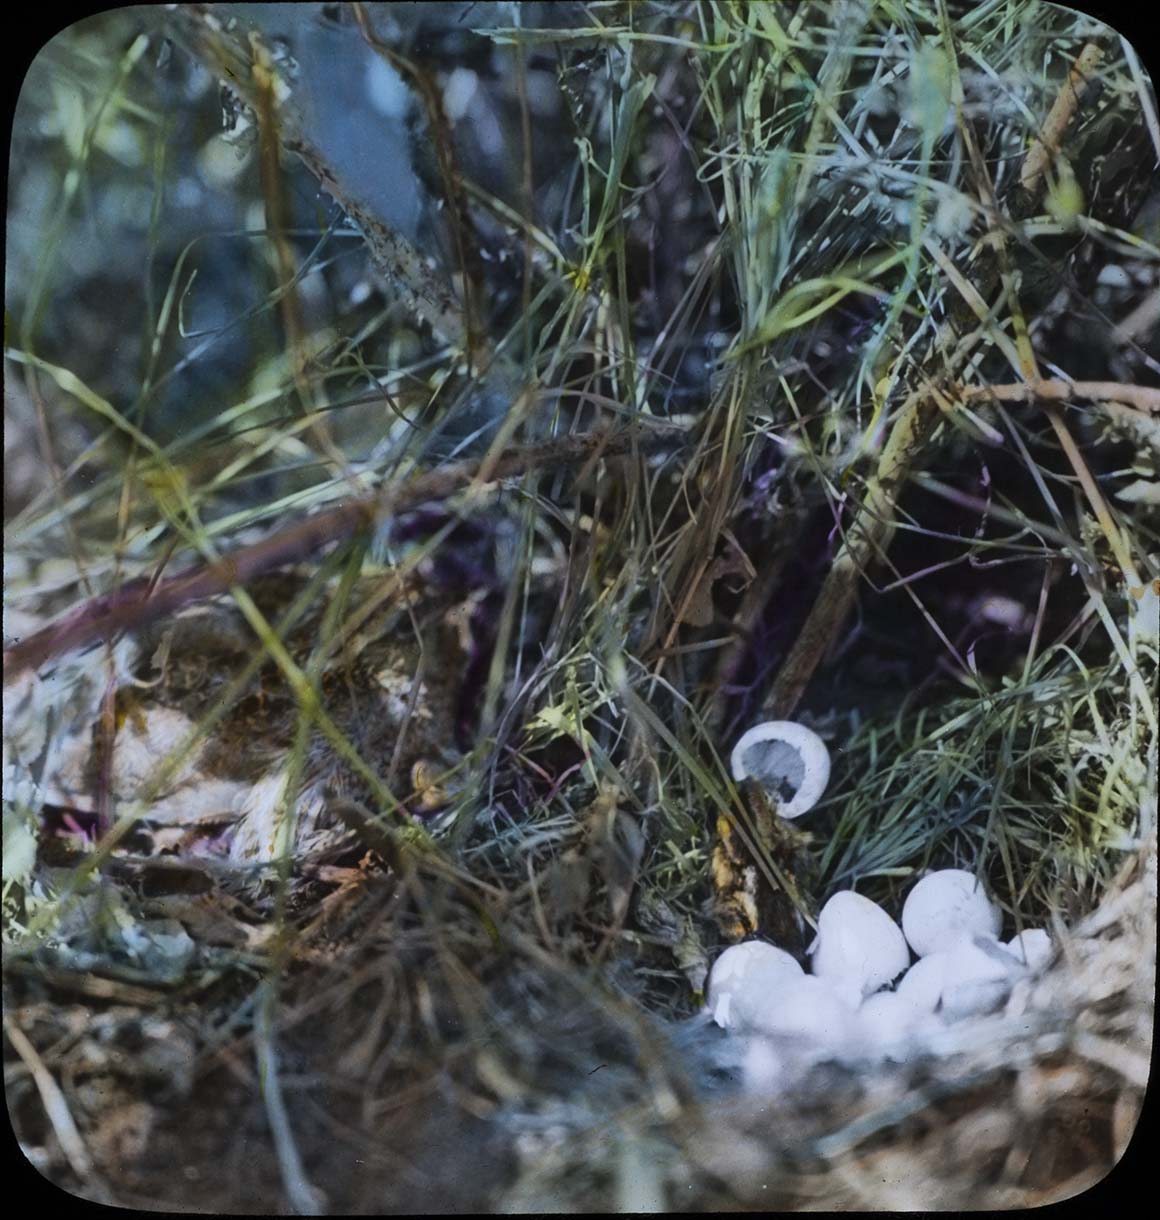 Lantern slide of a nest with eggs hatching